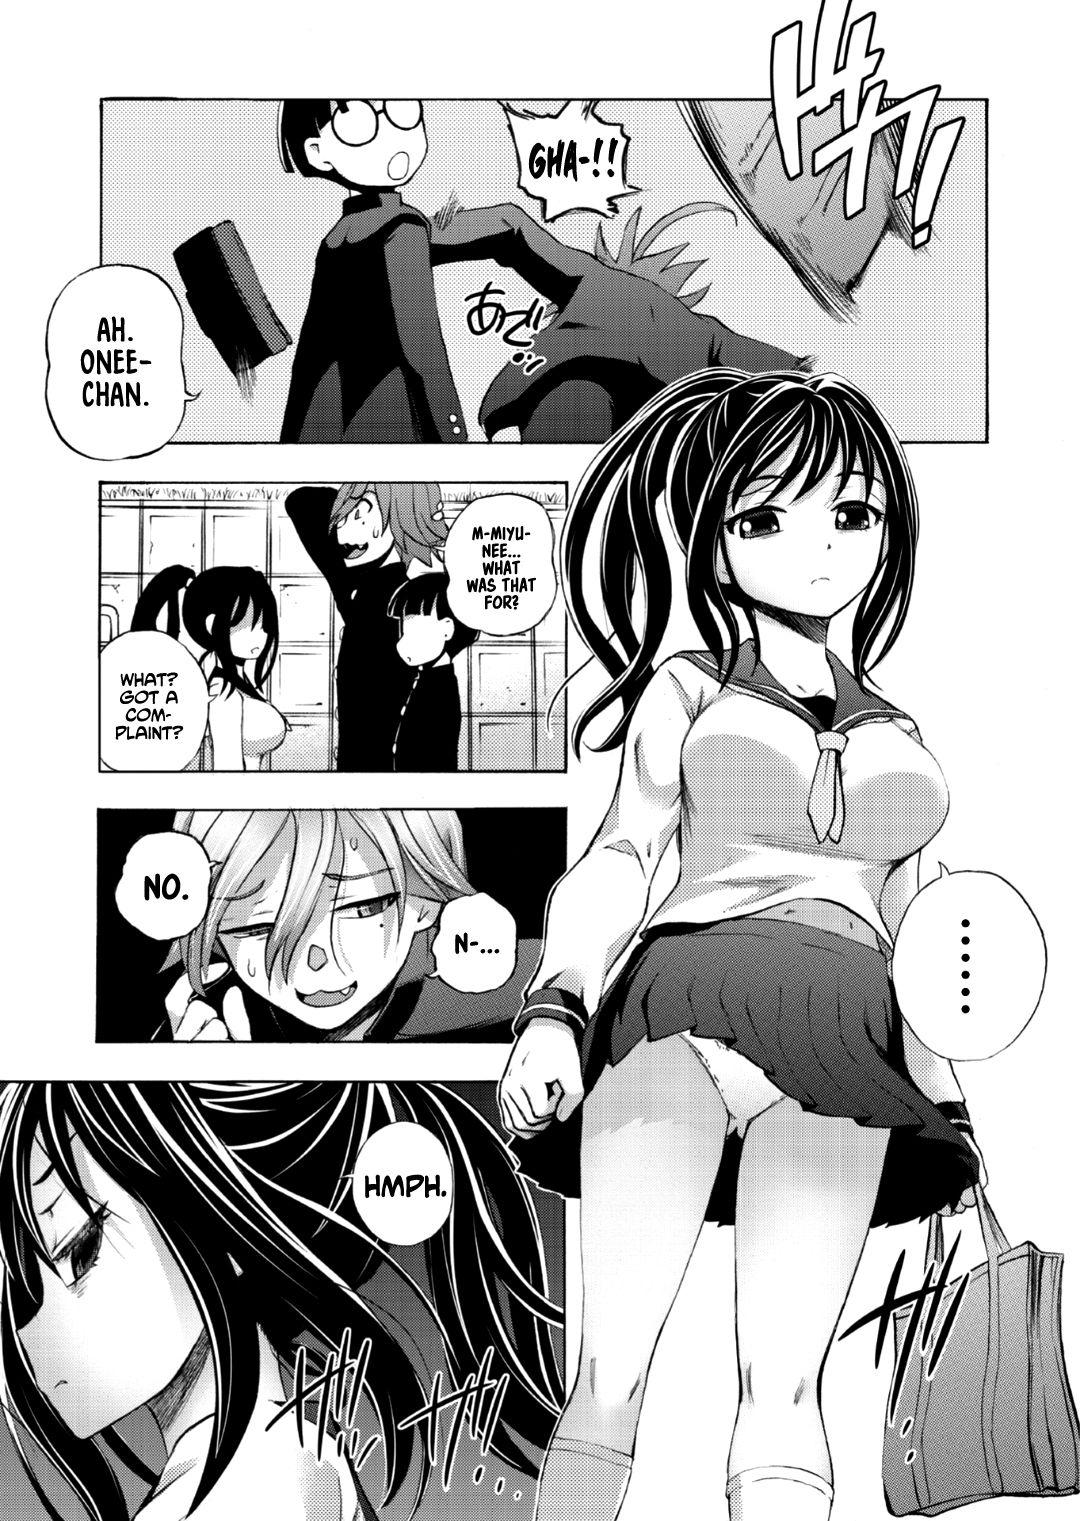 Amature Sex Tapes [Yuuki Tsumugi] Saiin Club ~The Time I Became A Girl And Got Creampied A Whole Bunch~ 1 [English] {Hennojin} Interracial Sex - Page 7